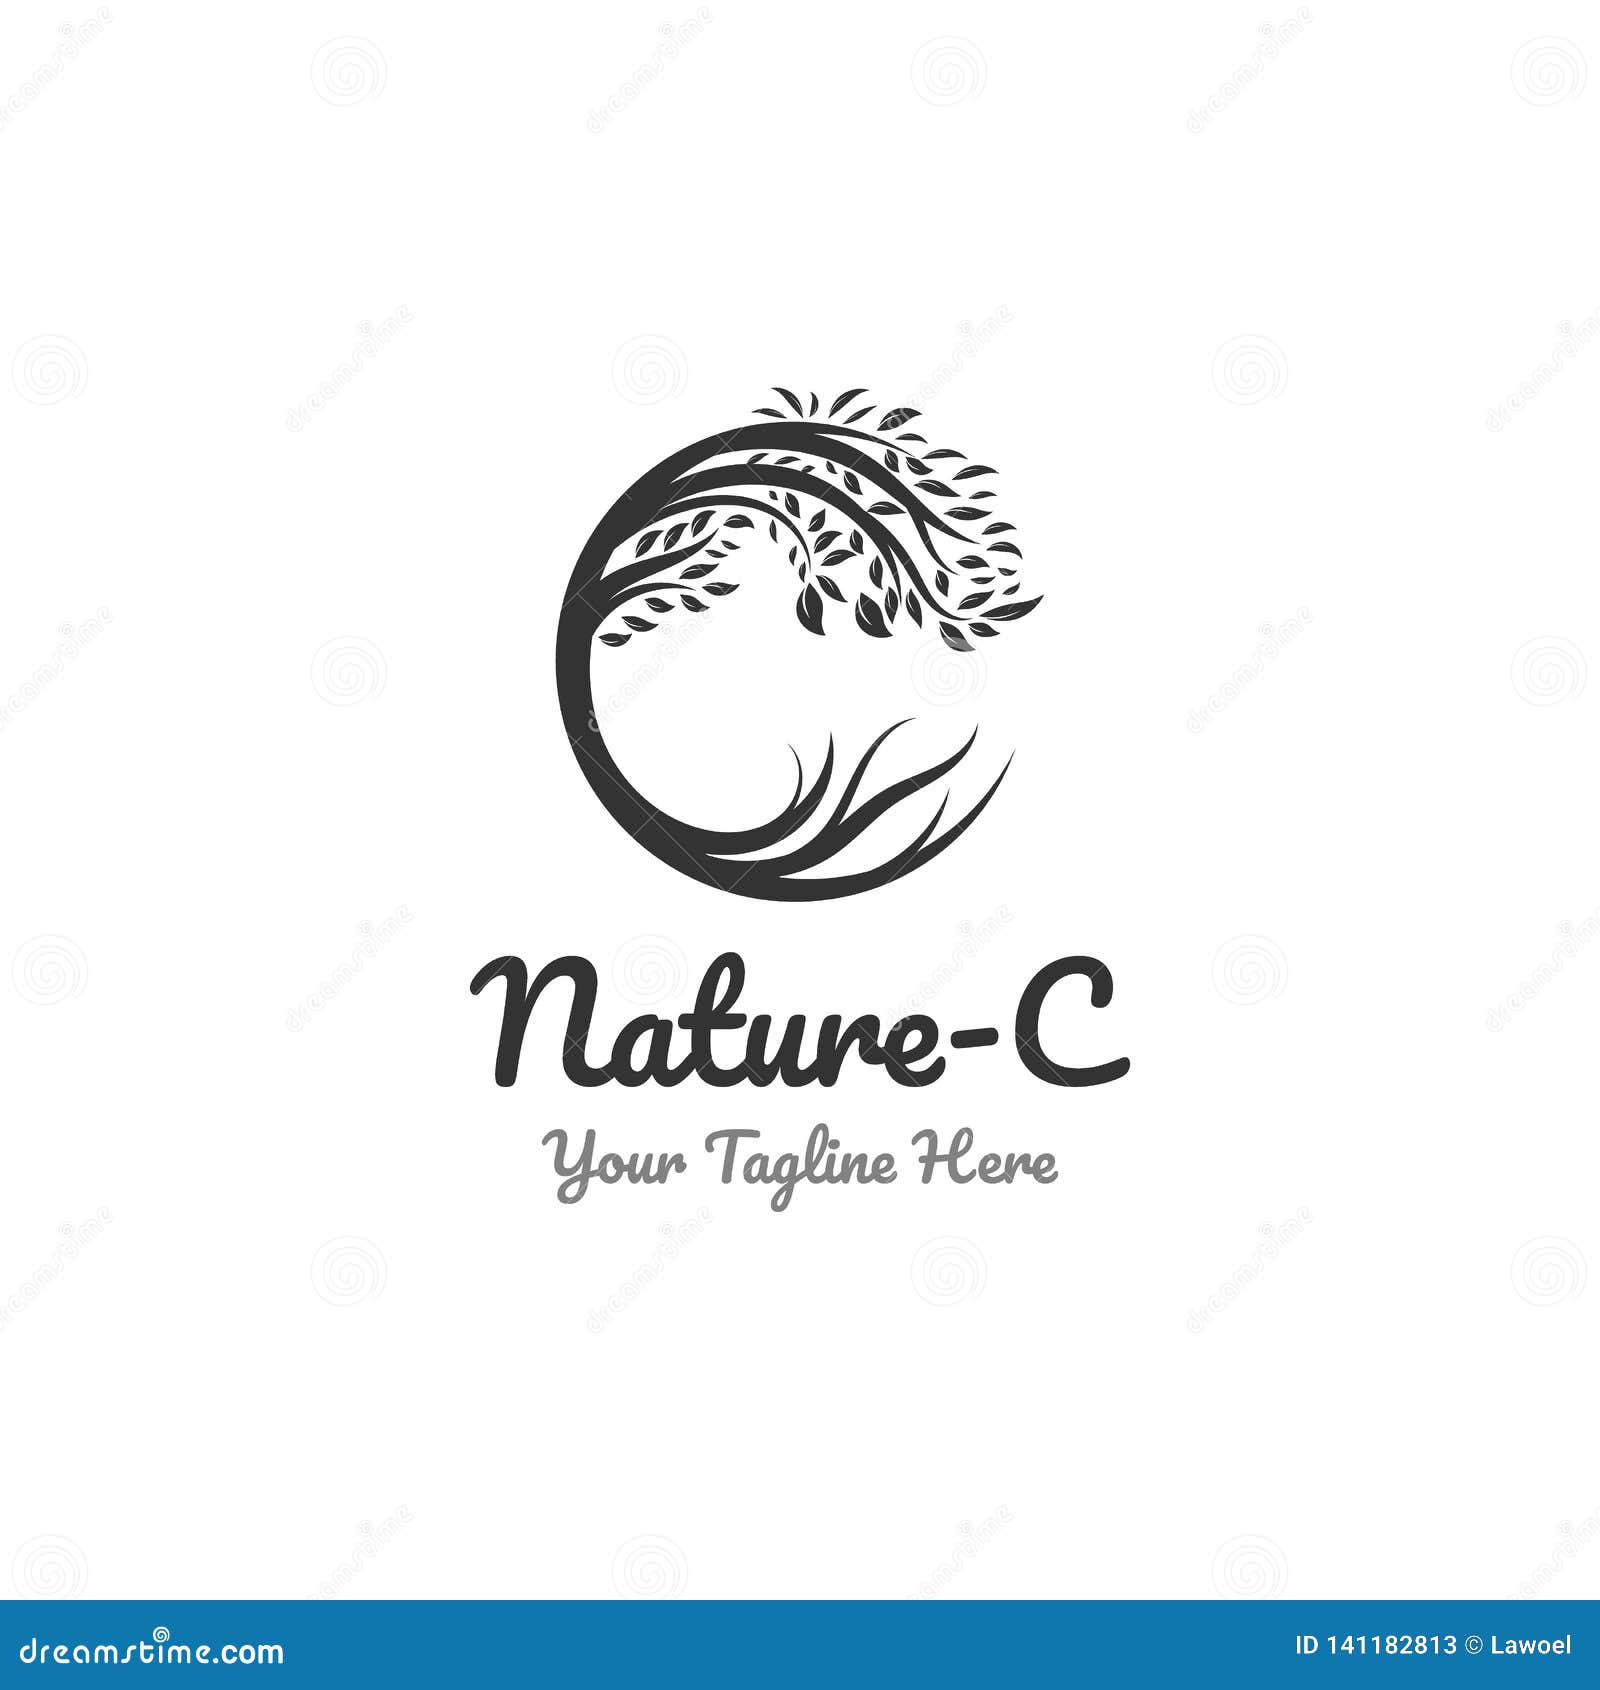 Nature Logo Designs And C Symbol Stock Vector Illustration Of